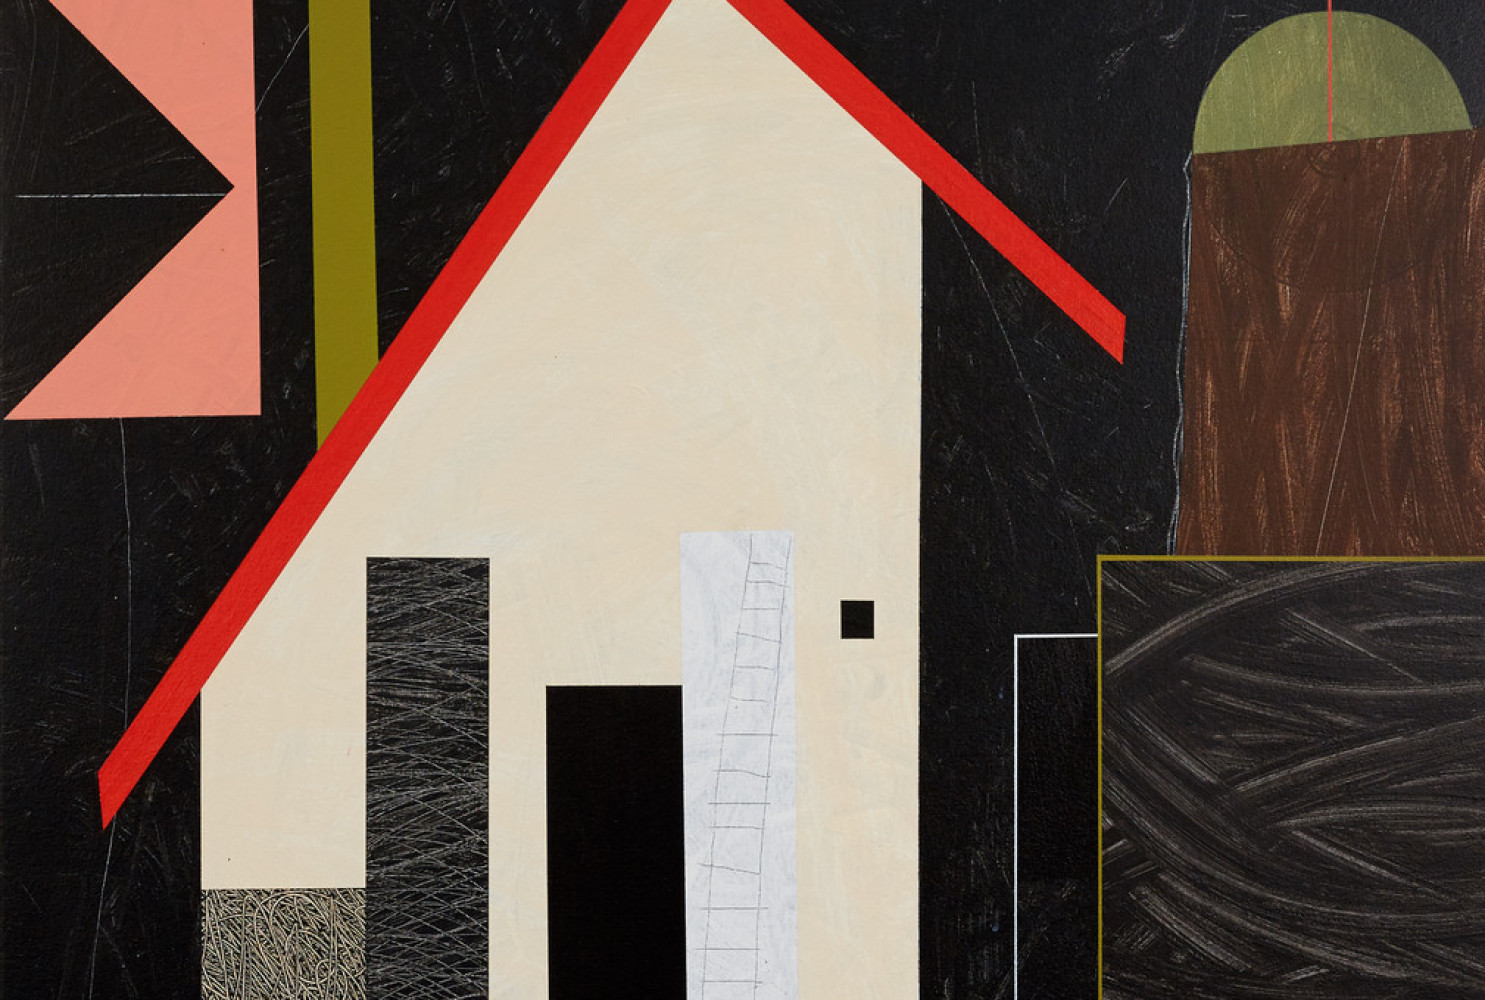 Houses, 2017, by Tom Stanley; Acrylic on canvas; 47.5 x 37.5 inches; courtesy of the artist.